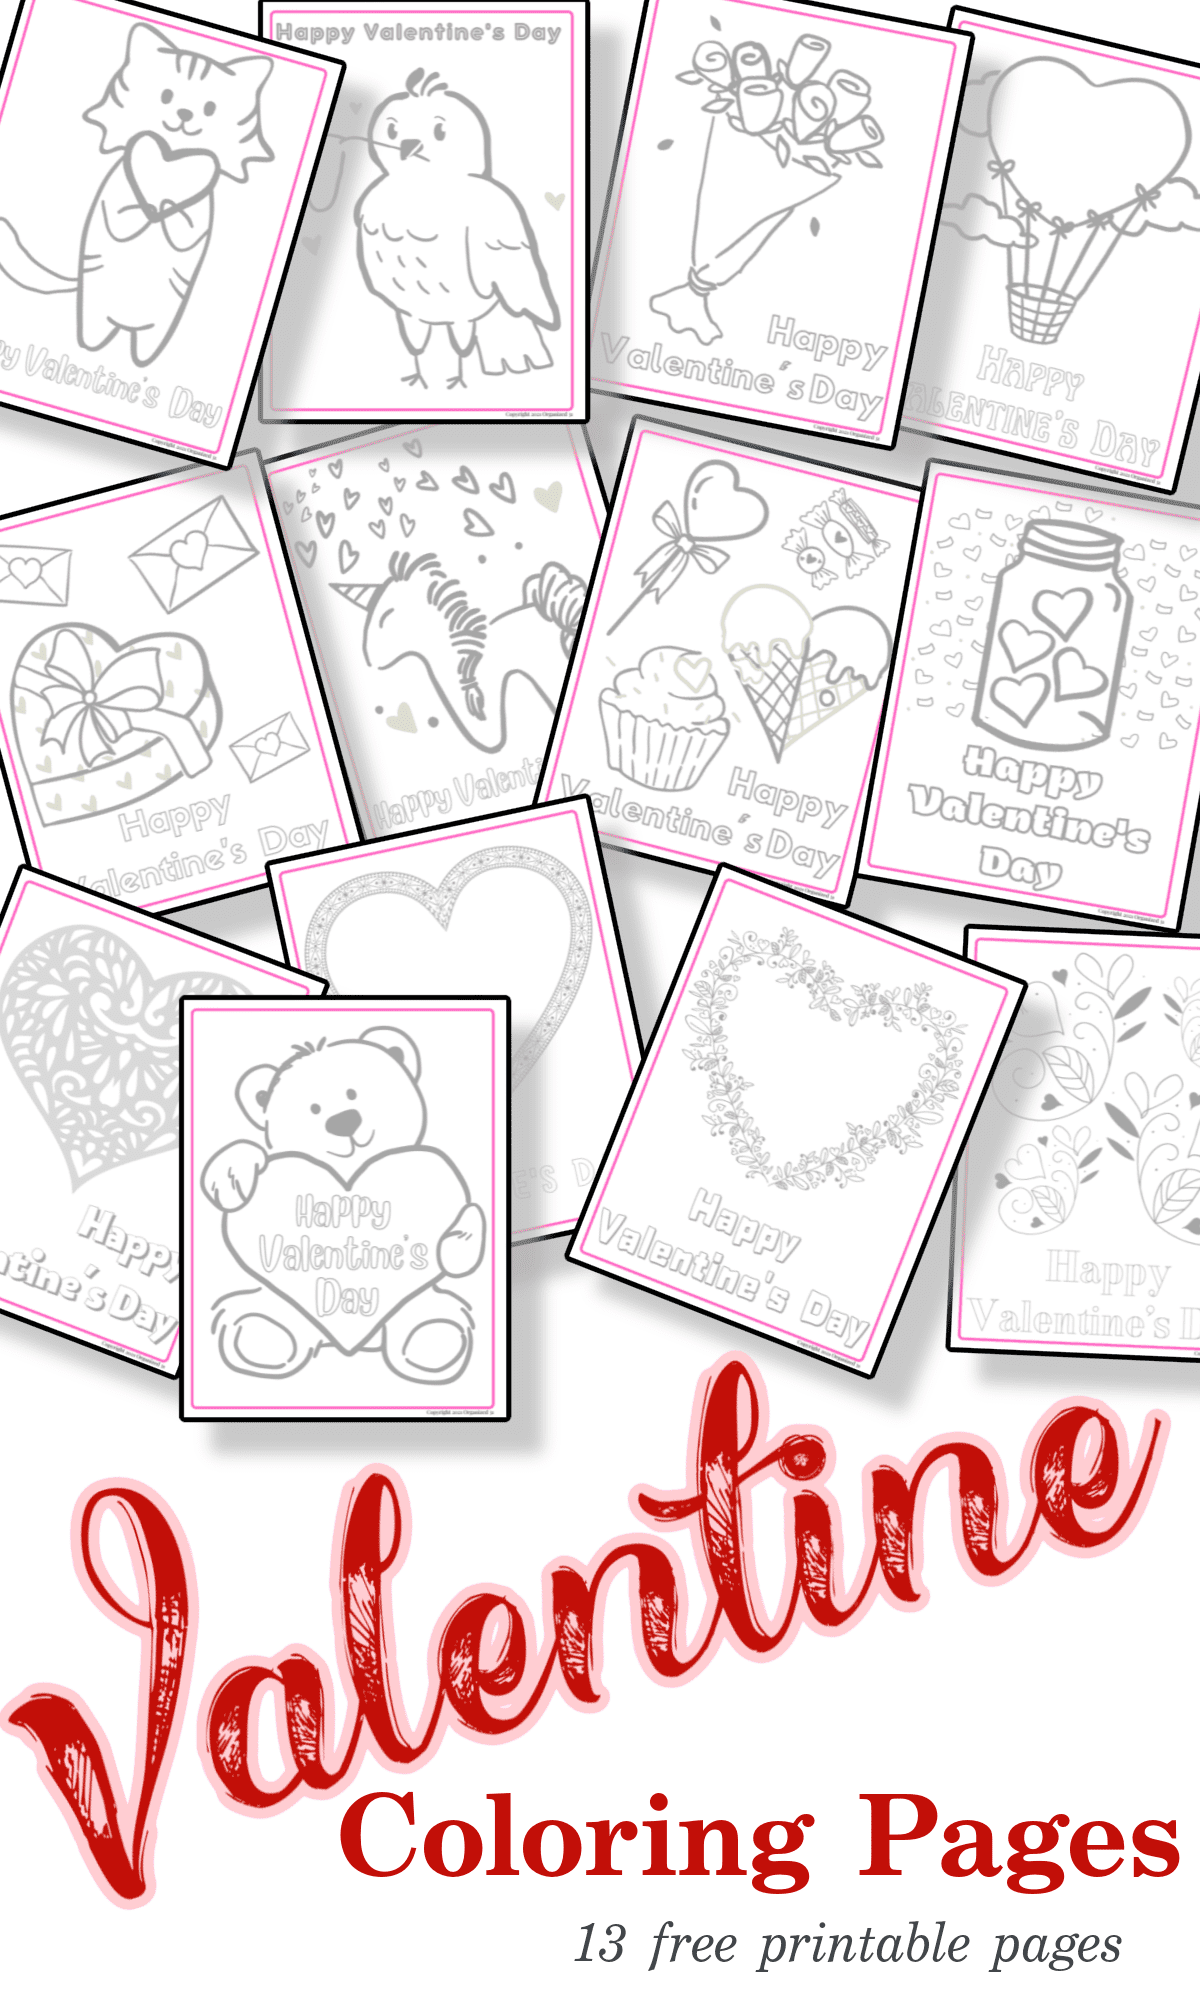 13 coloring page images with Valentine's Day theme